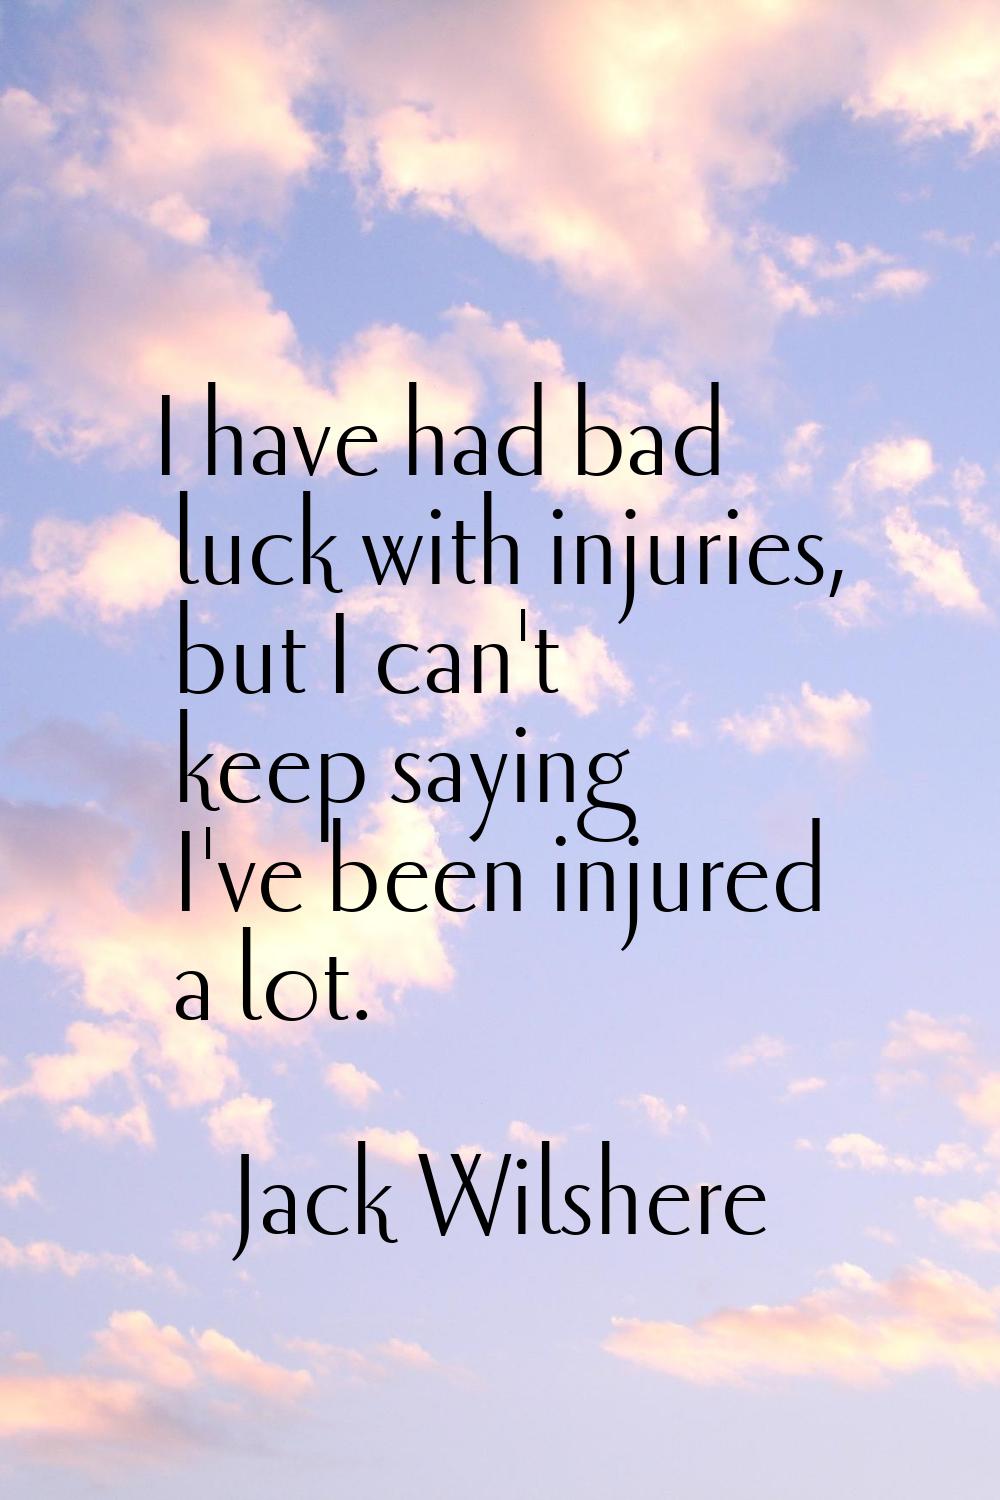 I have had bad luck with injuries, but I can't keep saying I've been injured a lot.